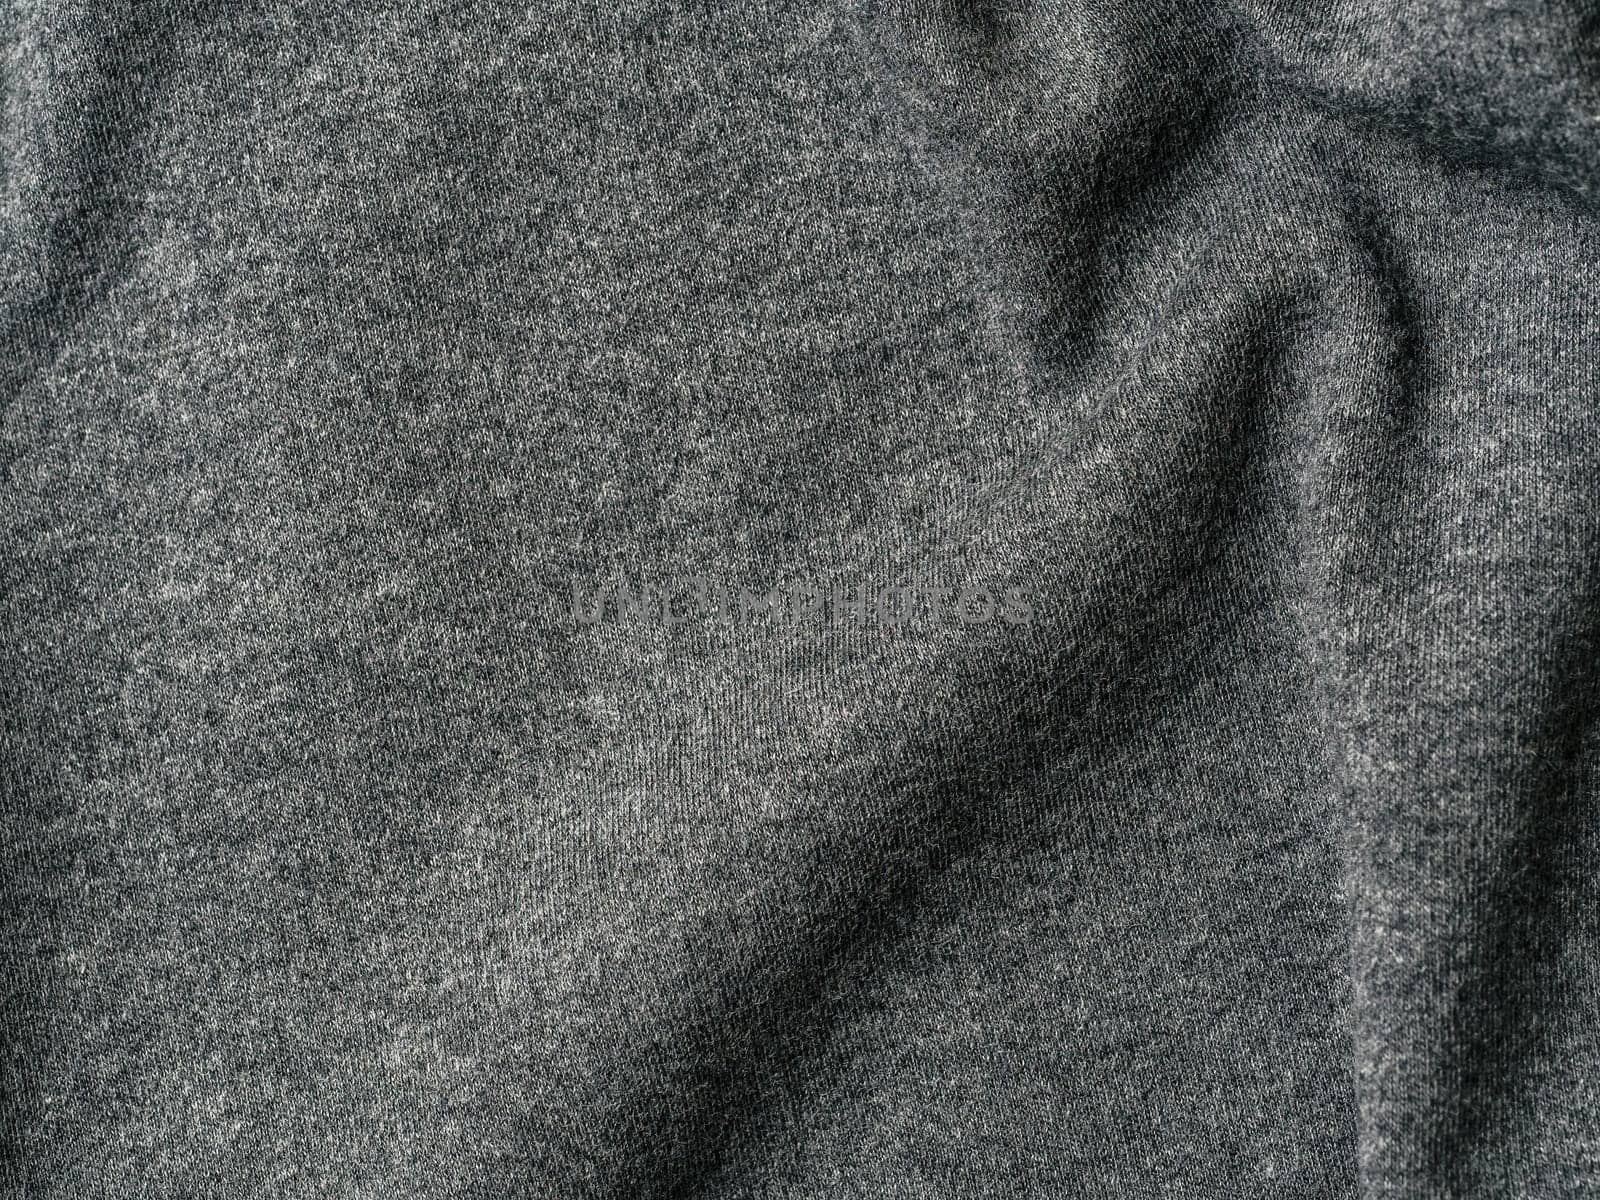 Gray cotton fabric texture. Clothes cotton jersey background with folds